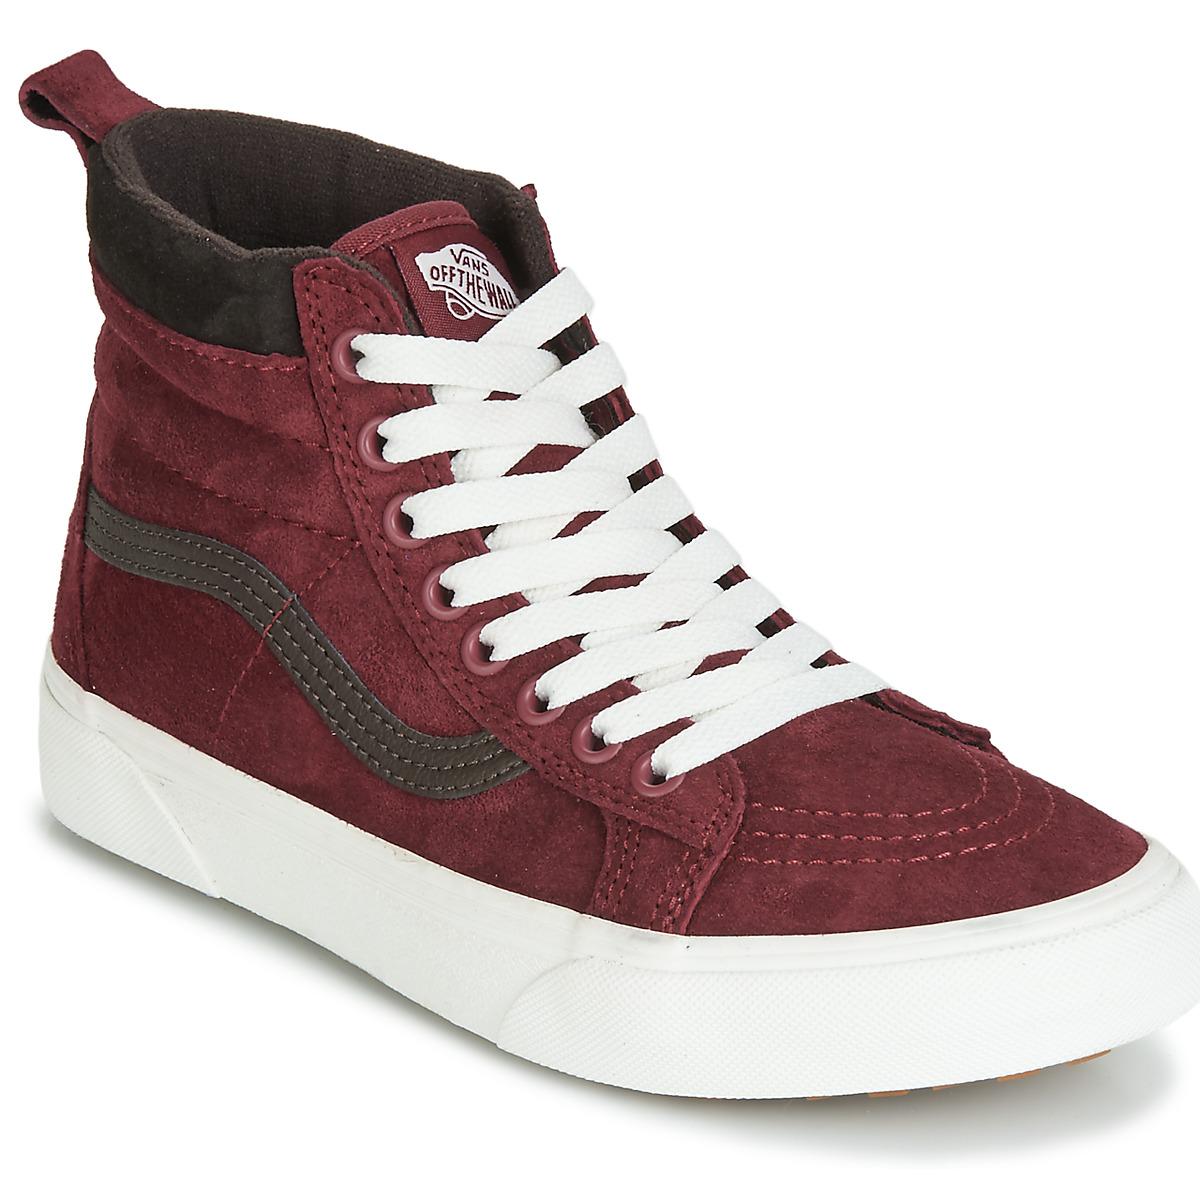 vans shoes red and brown